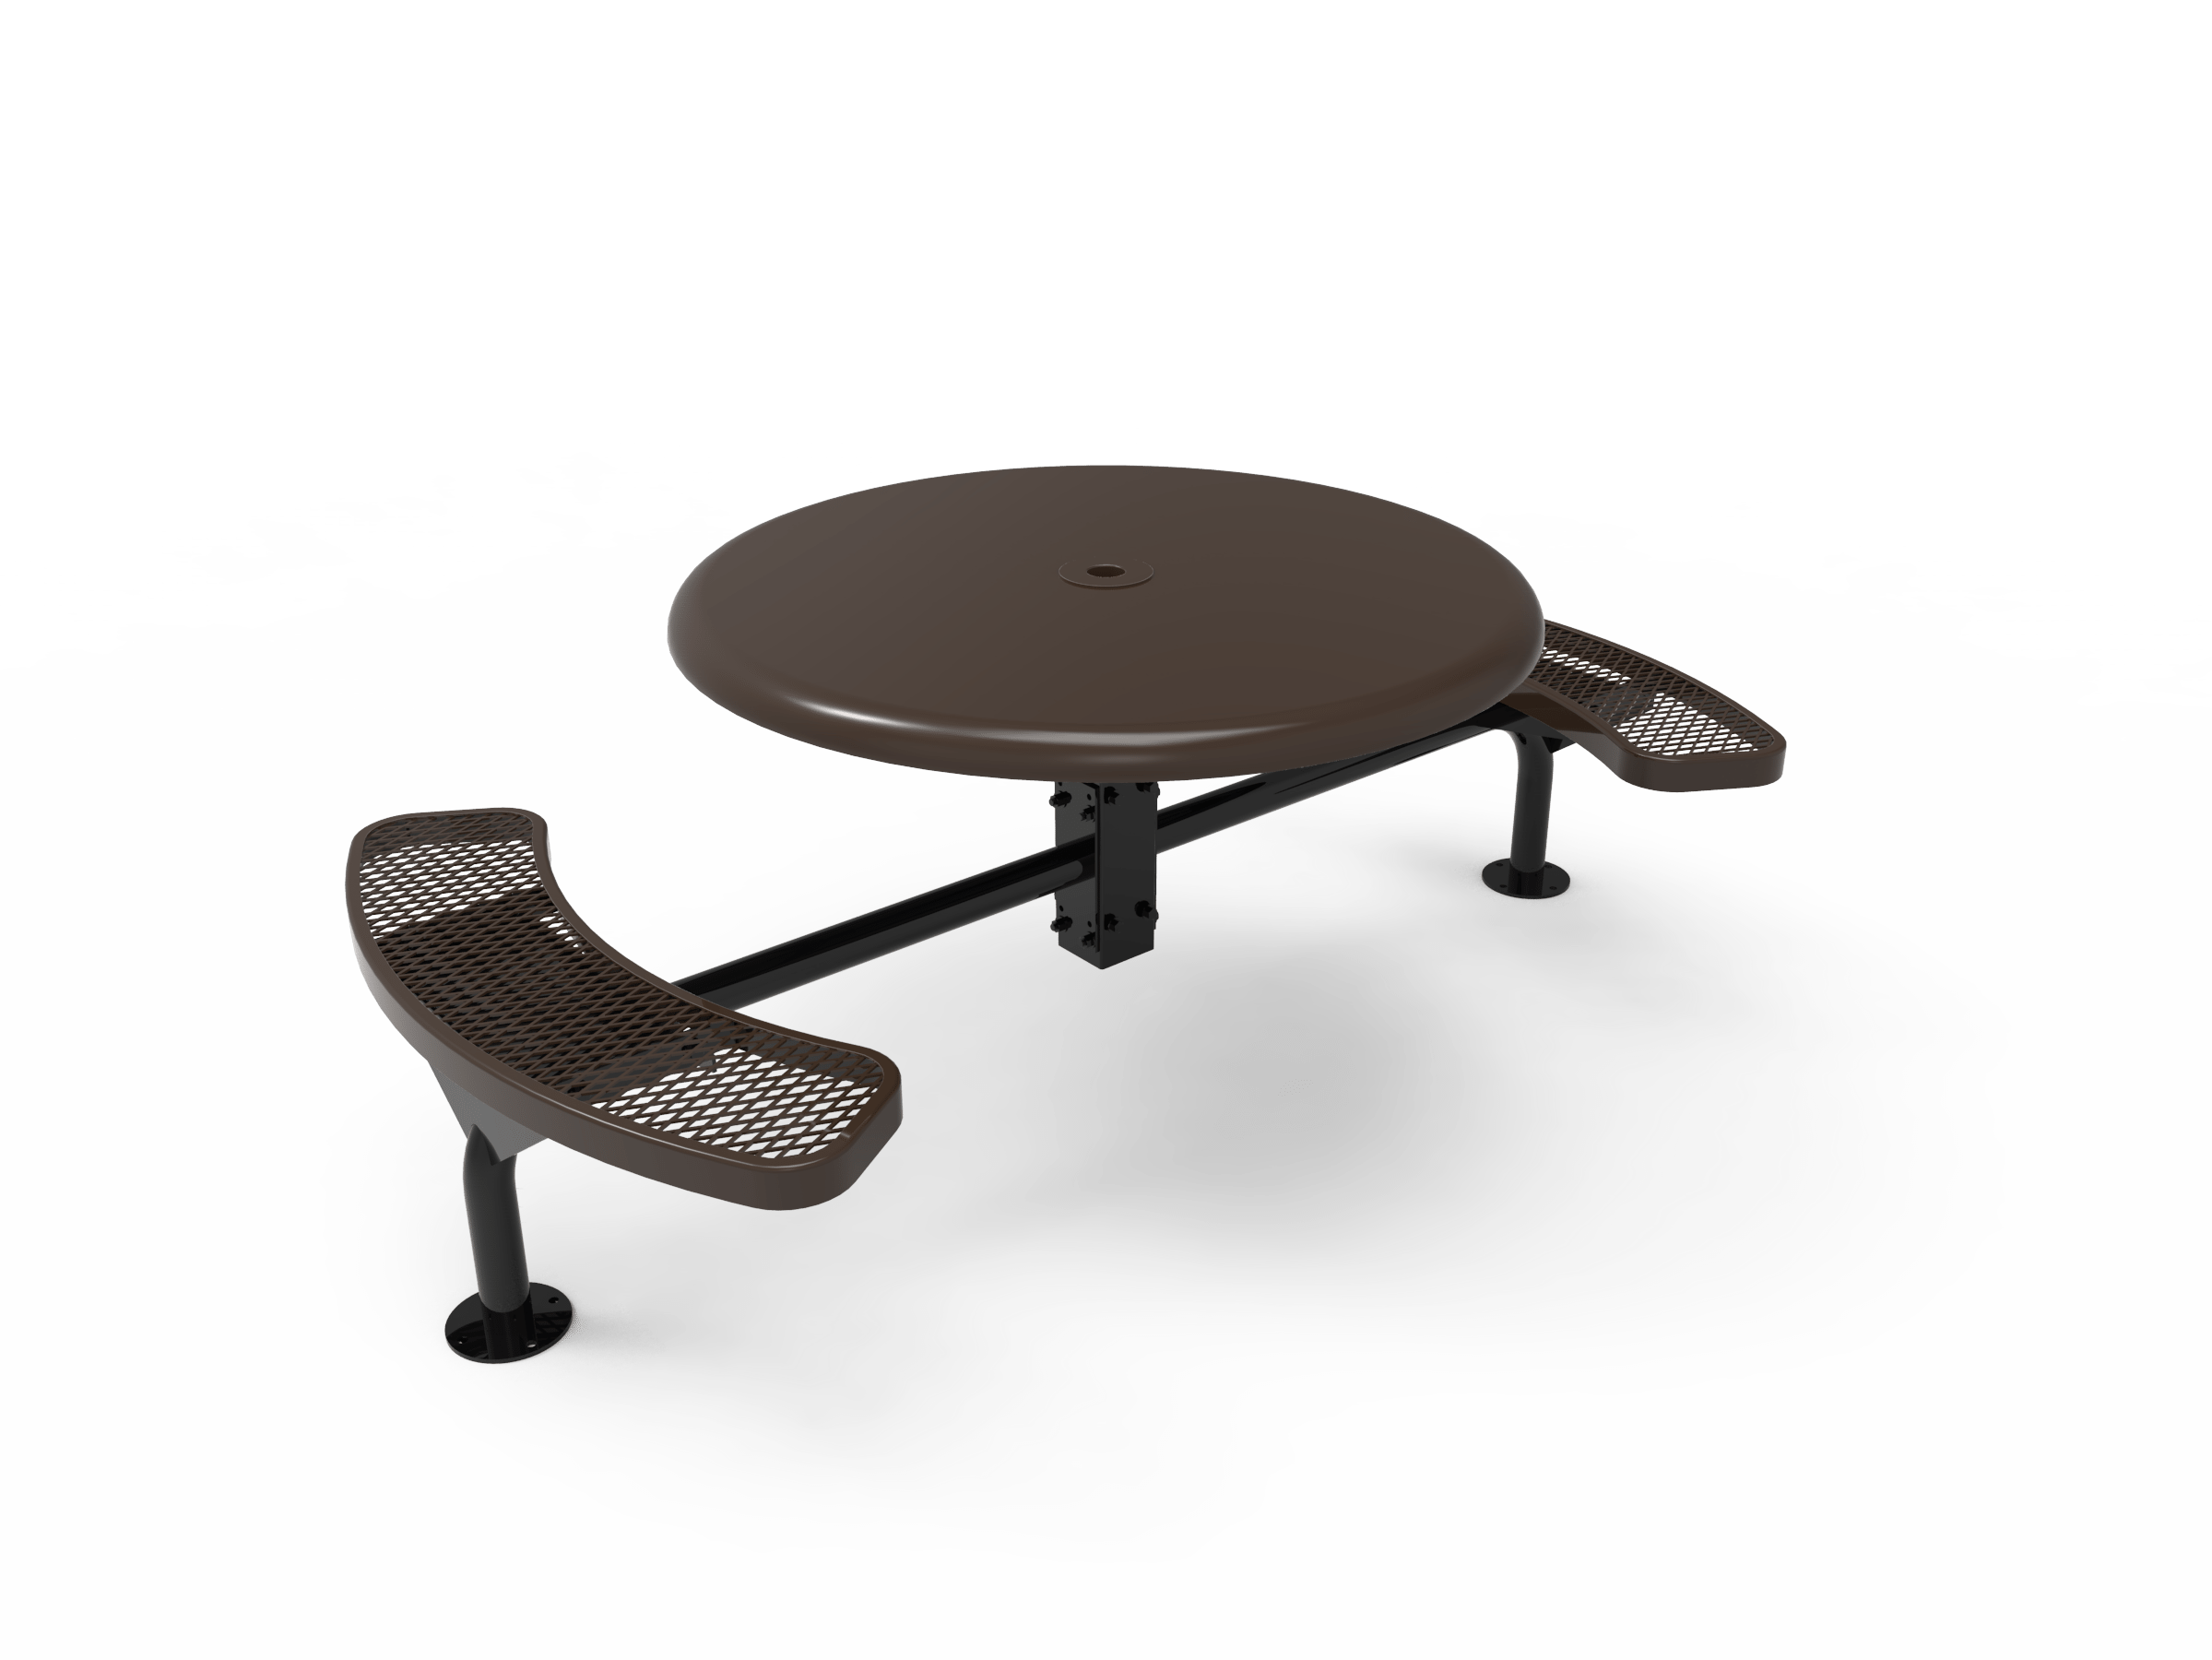 46″ Round Solid Top Nexus Surface Table With 2 Seats-Mesh
TRS46-C-52-012
Industry Standard Finish
$1449.00
TRS46-A-52-012
Advantage Premium Finish
$1839.00
